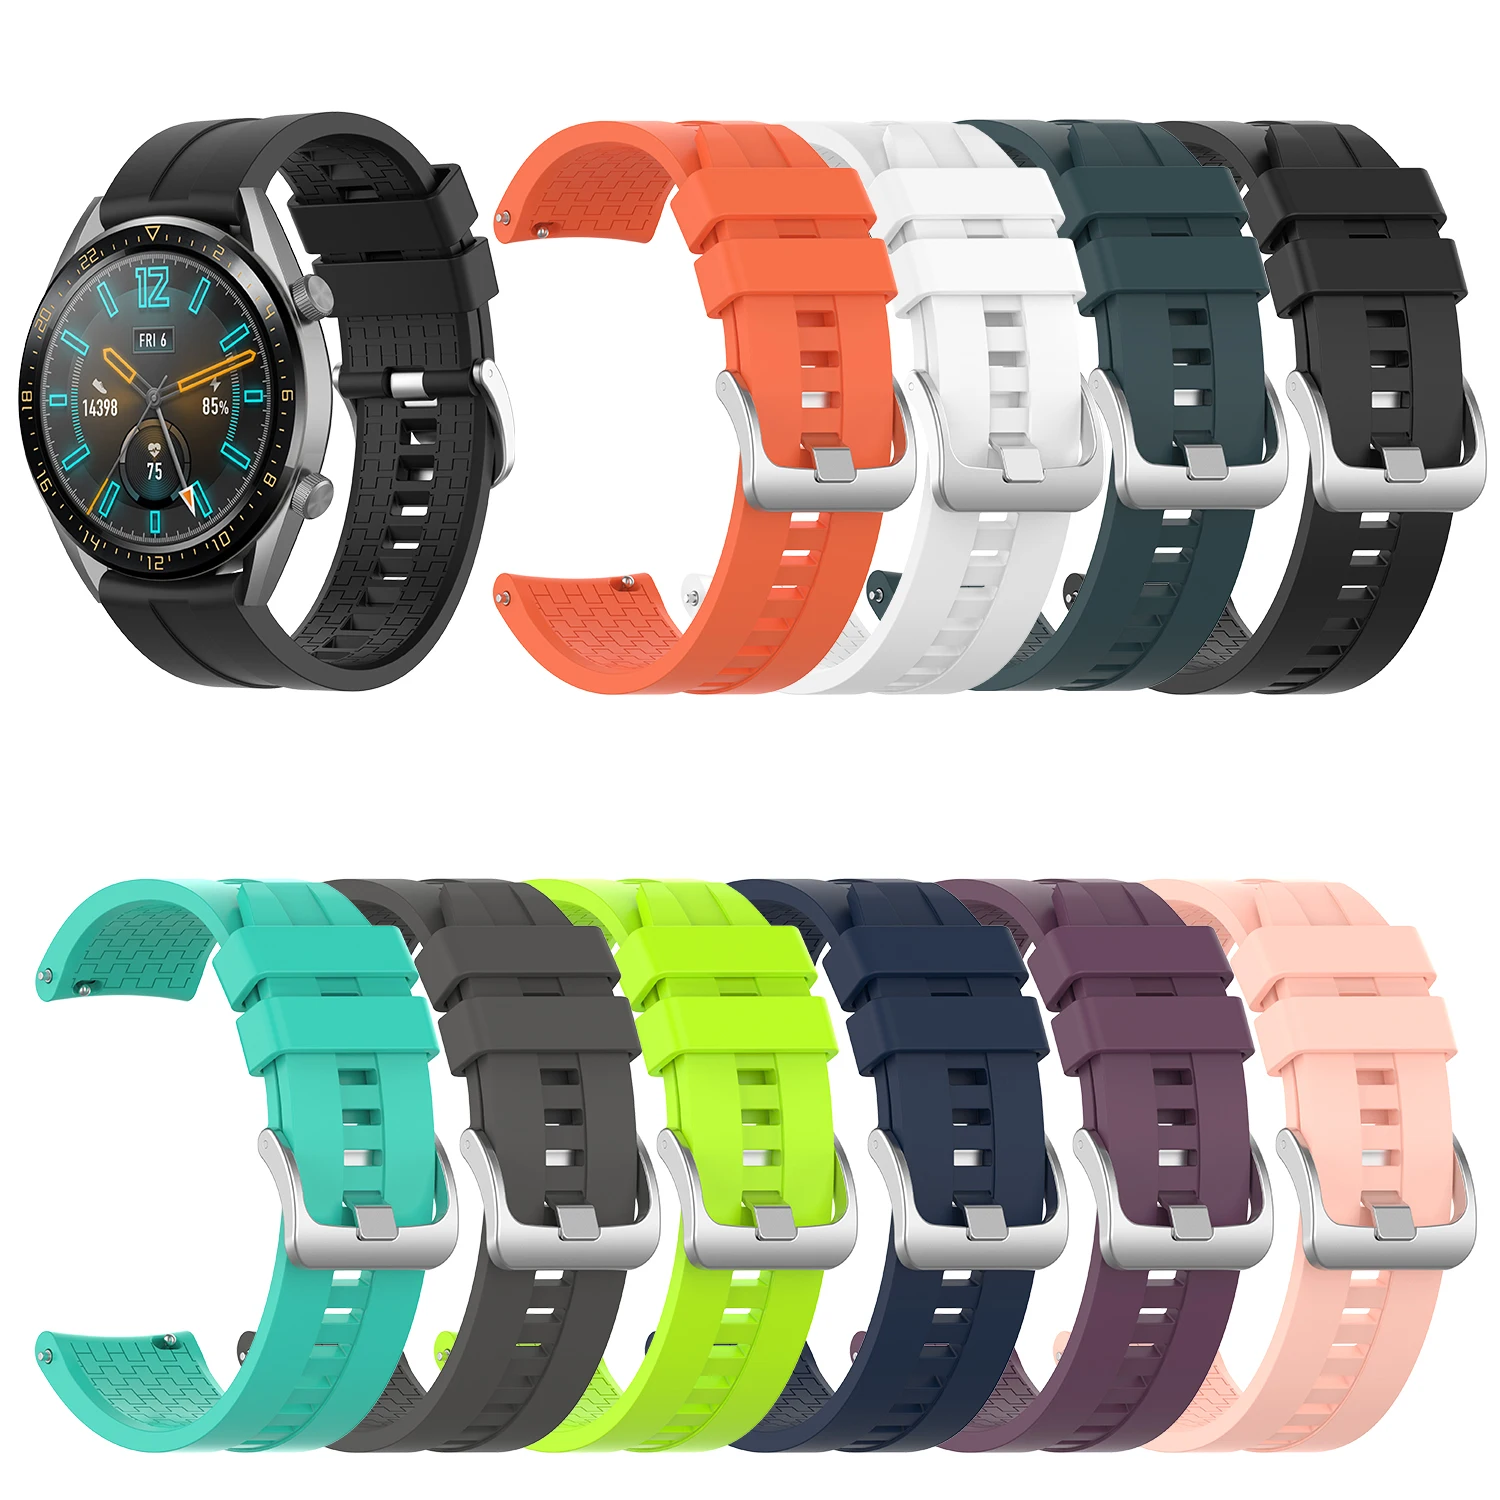 

22mm Wrist Strap Band for Huawei Watch GT/GT2 46mm/Samsung Gear S3 /Amazfit GTR 47mm Smartwatch Band, 10 color available